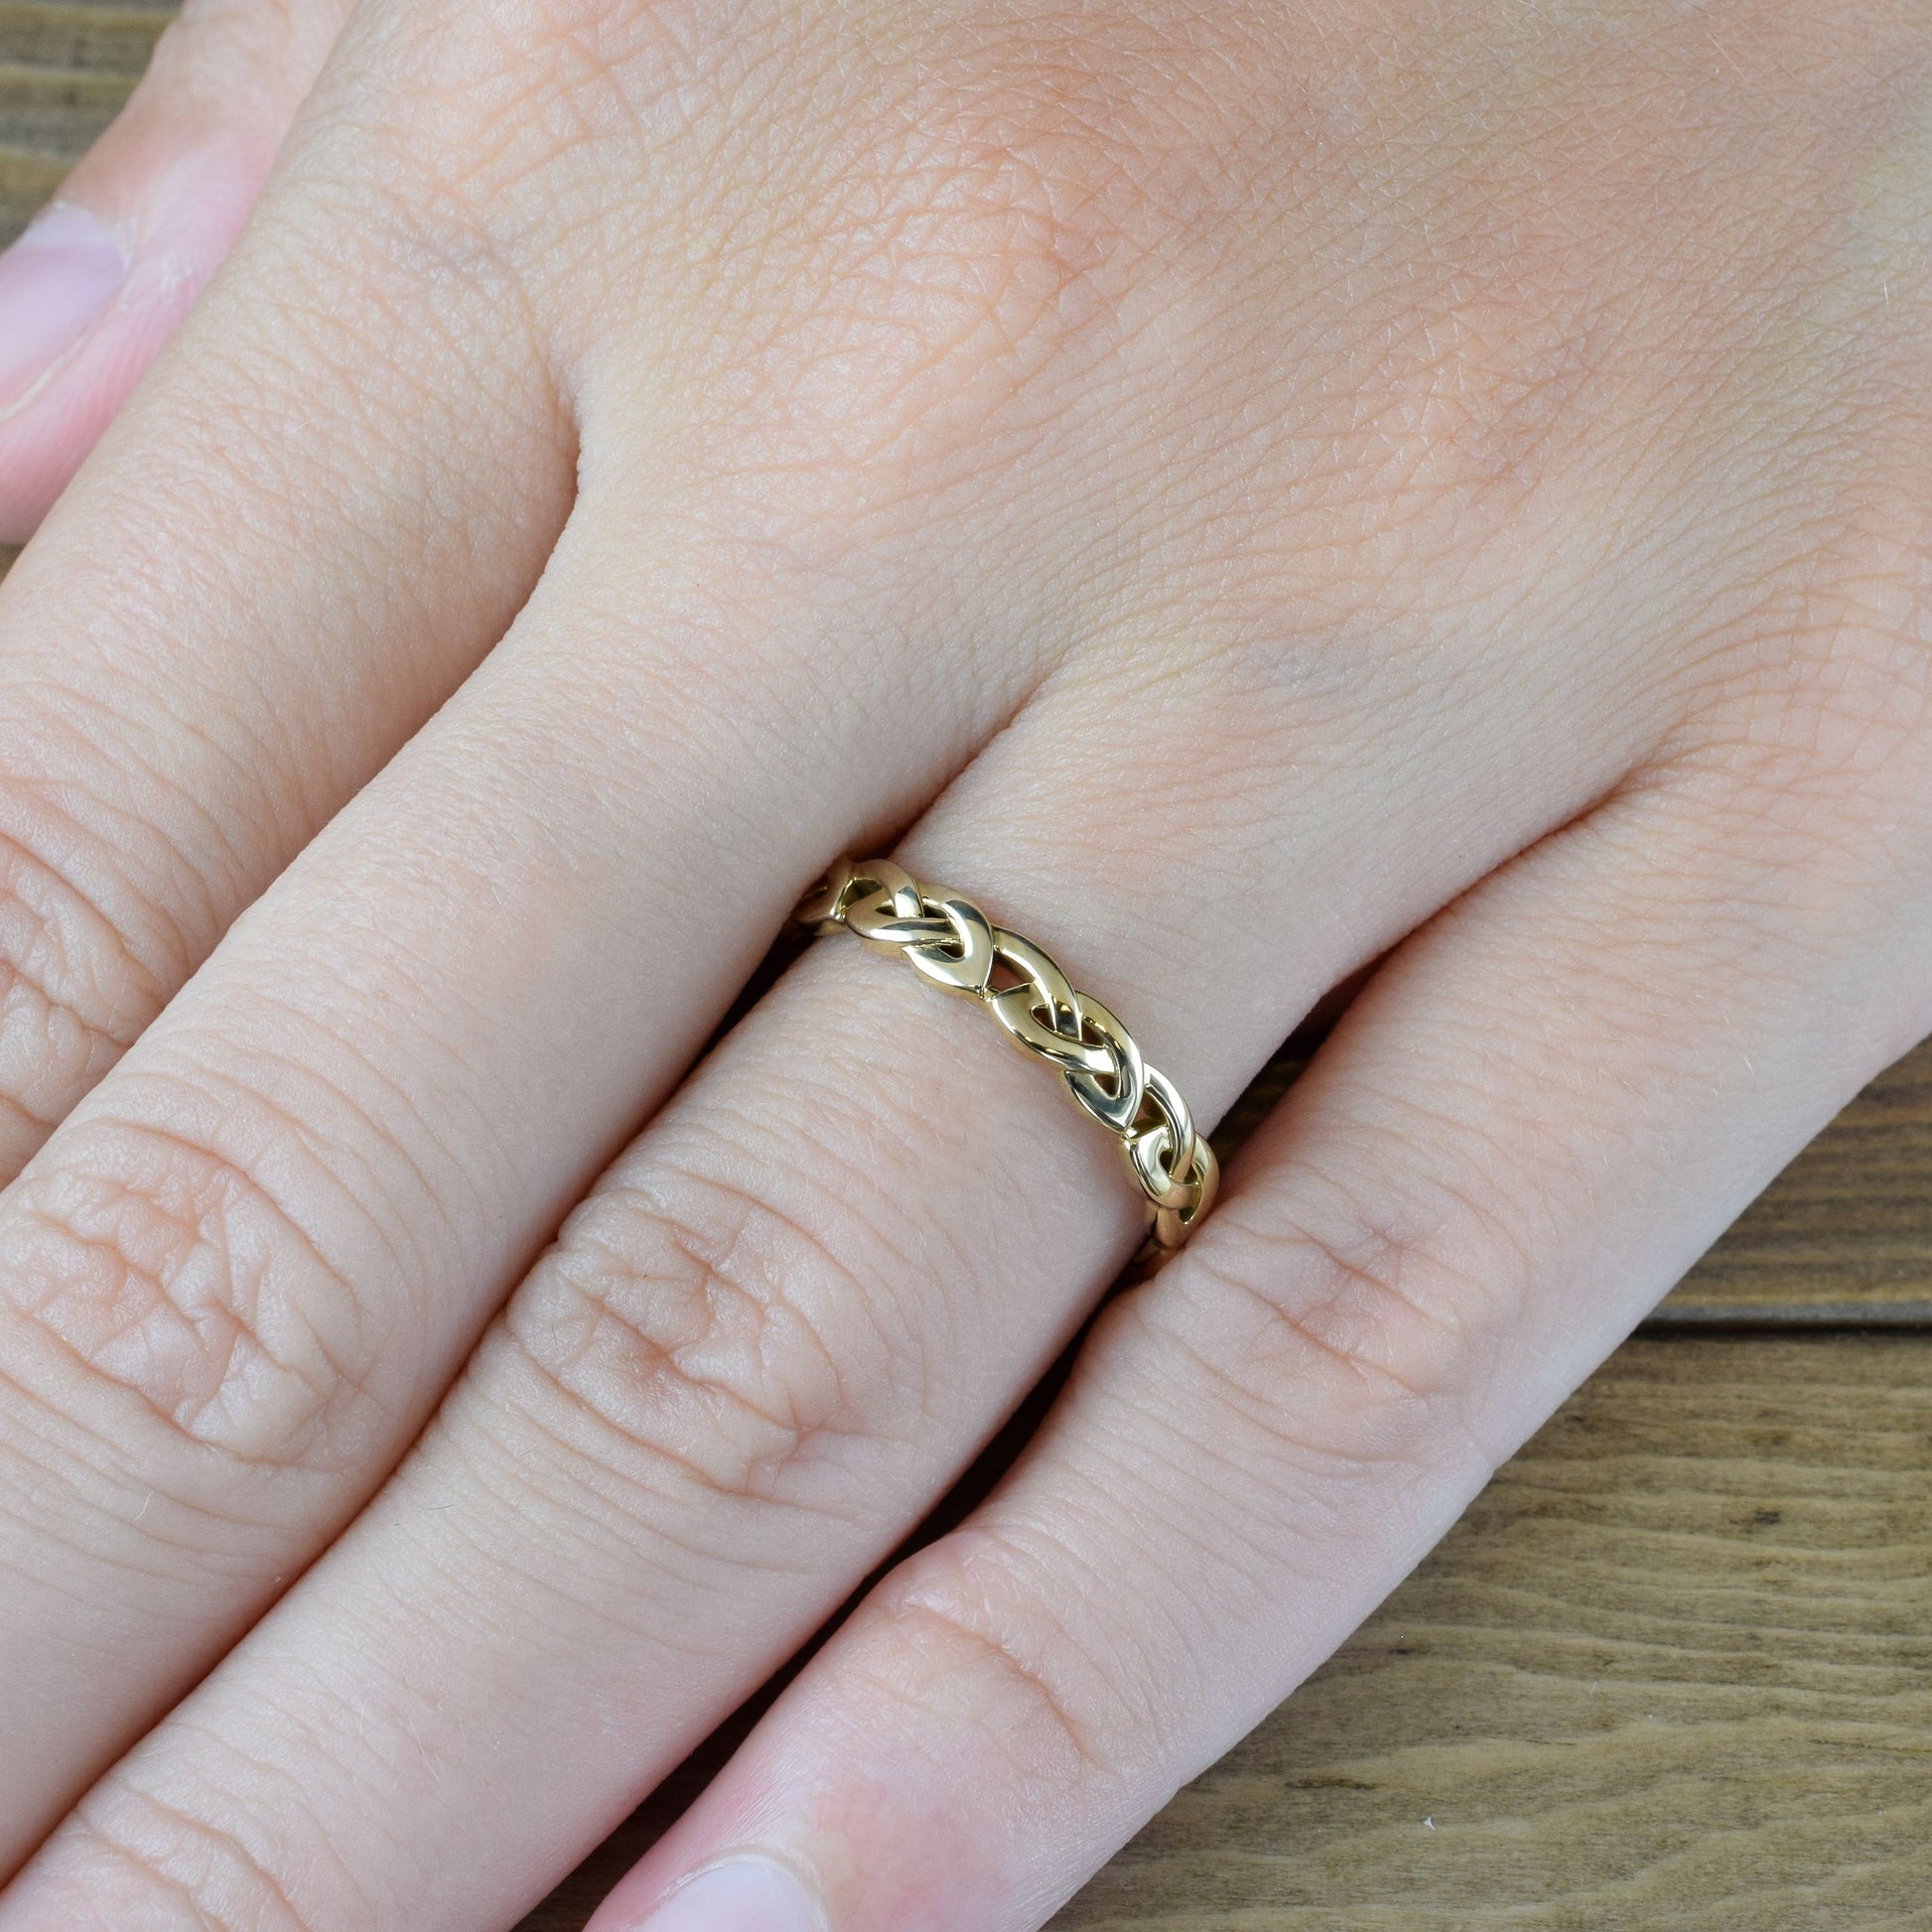 overhand knot eternity ring in yellow gold on finger